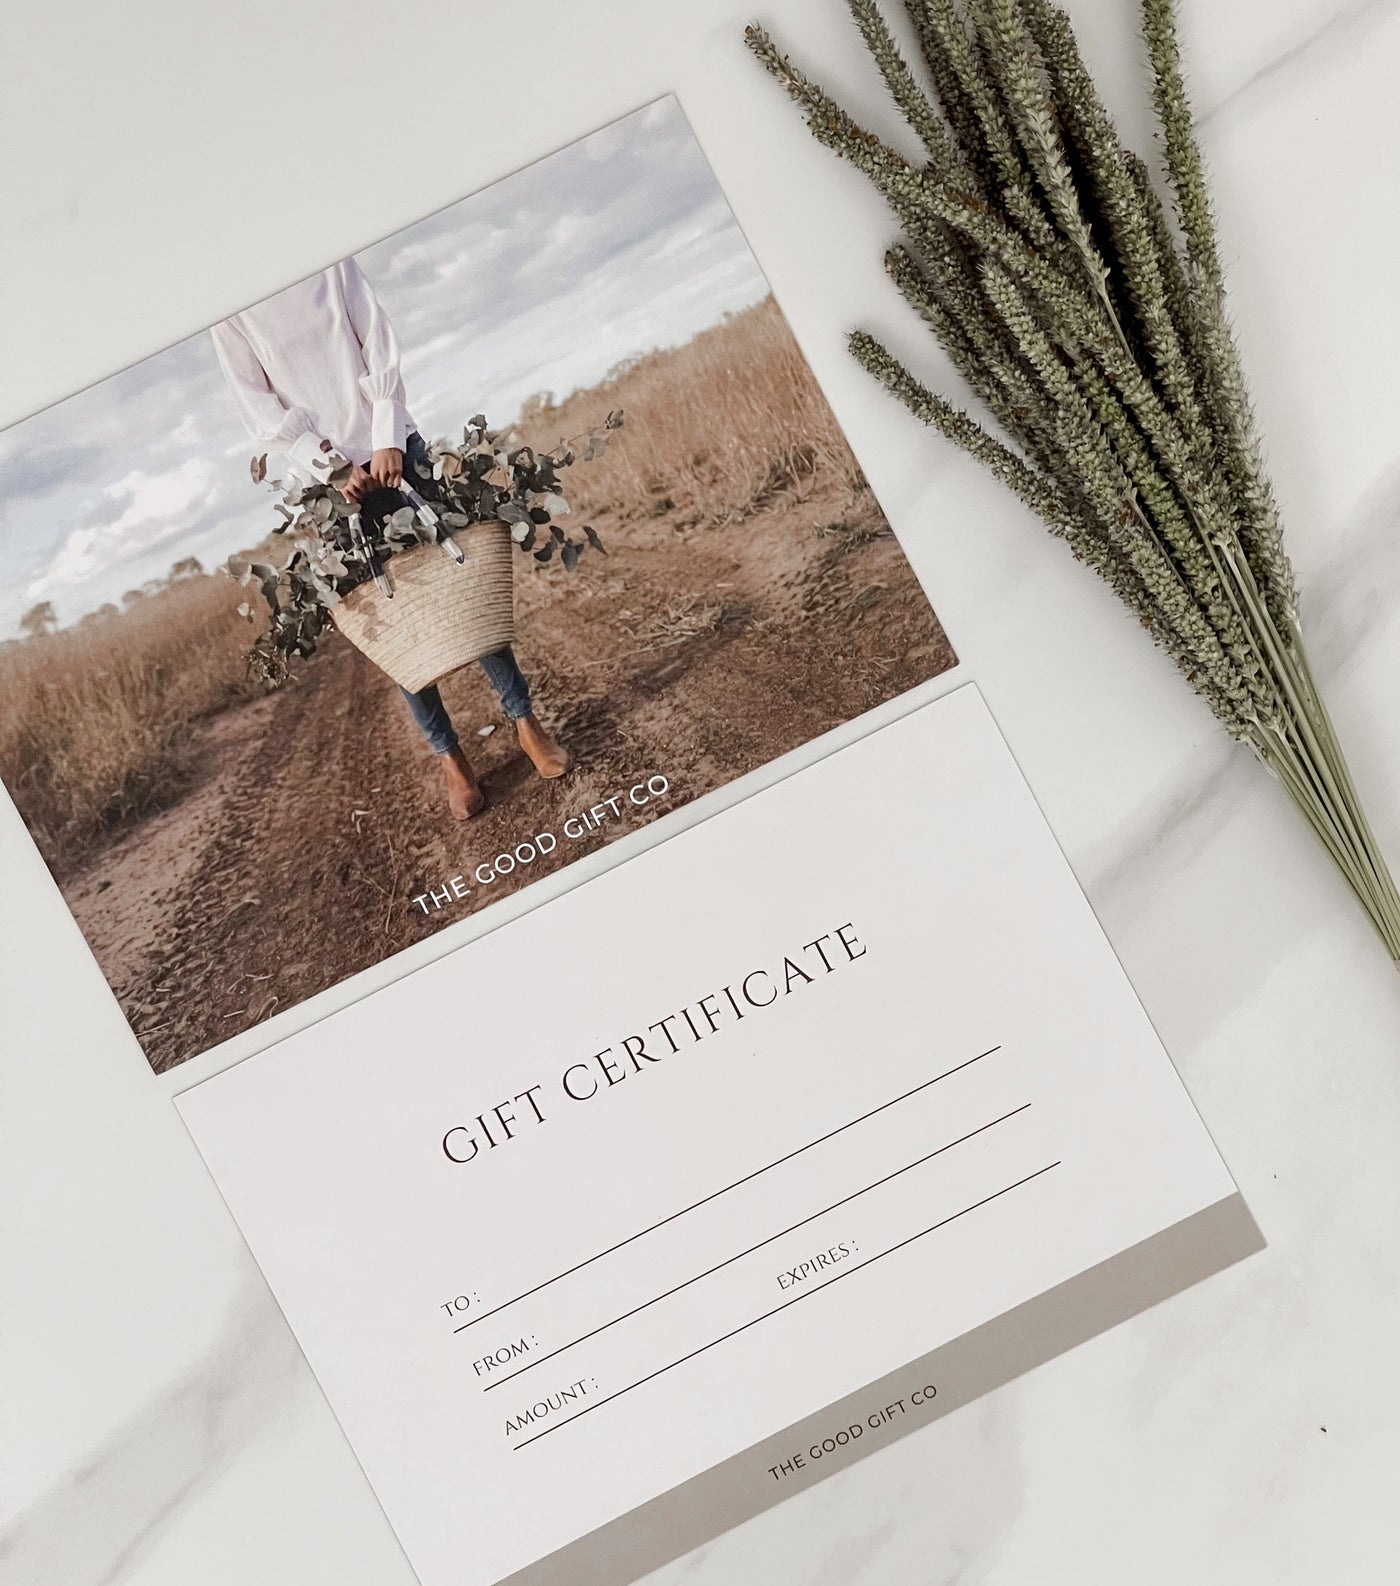 The Good Gift Co ~ Gift Card